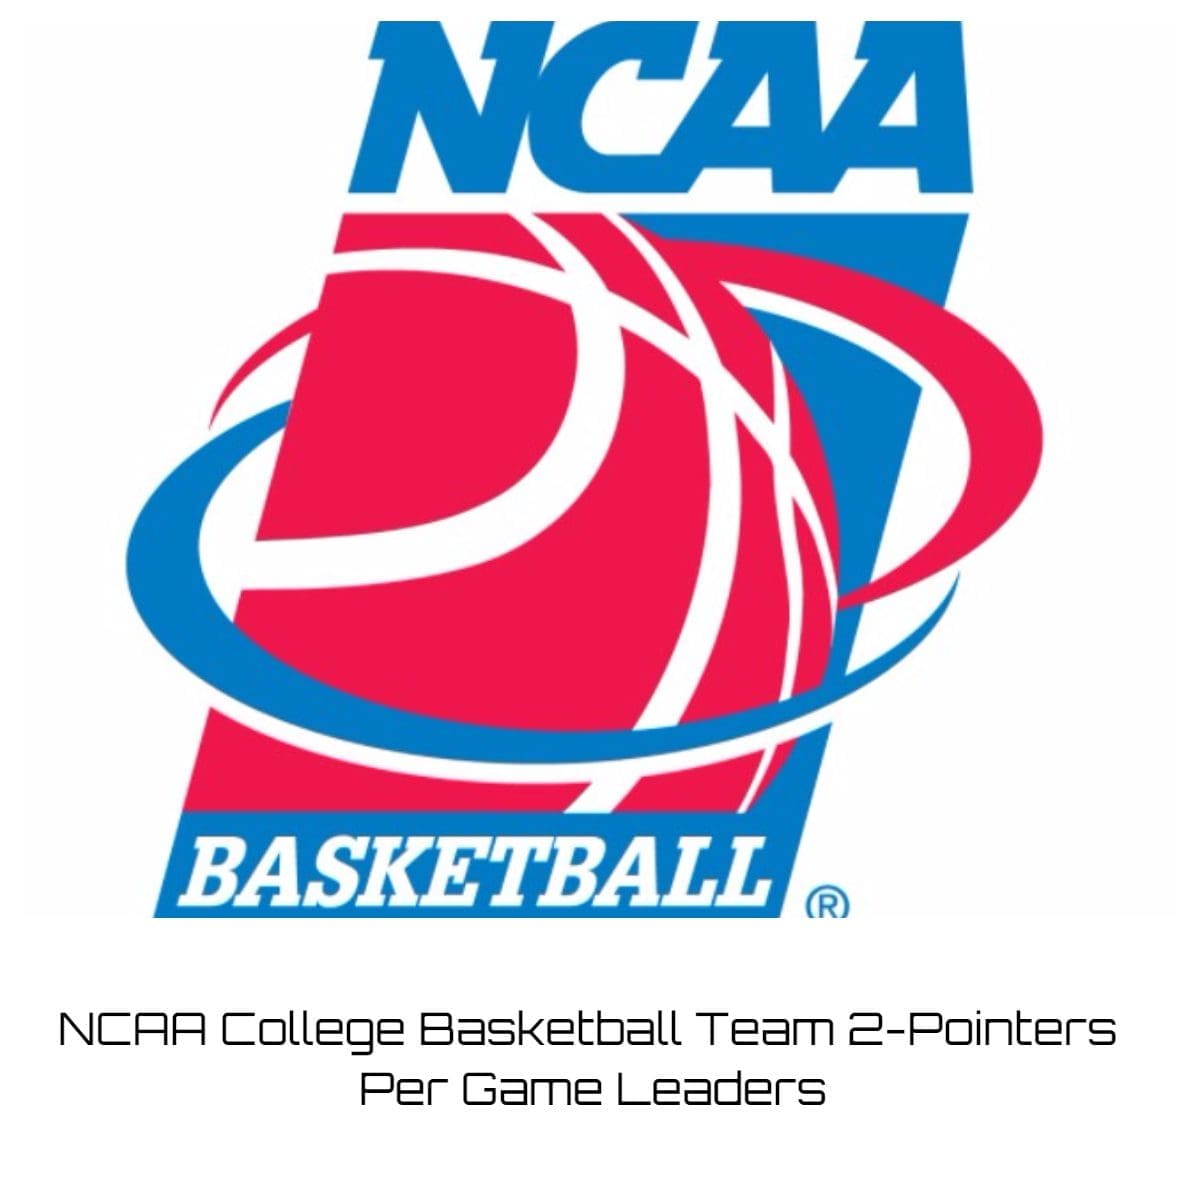 NCAA College Basketball Team 2-Pointers Per Game Leaders